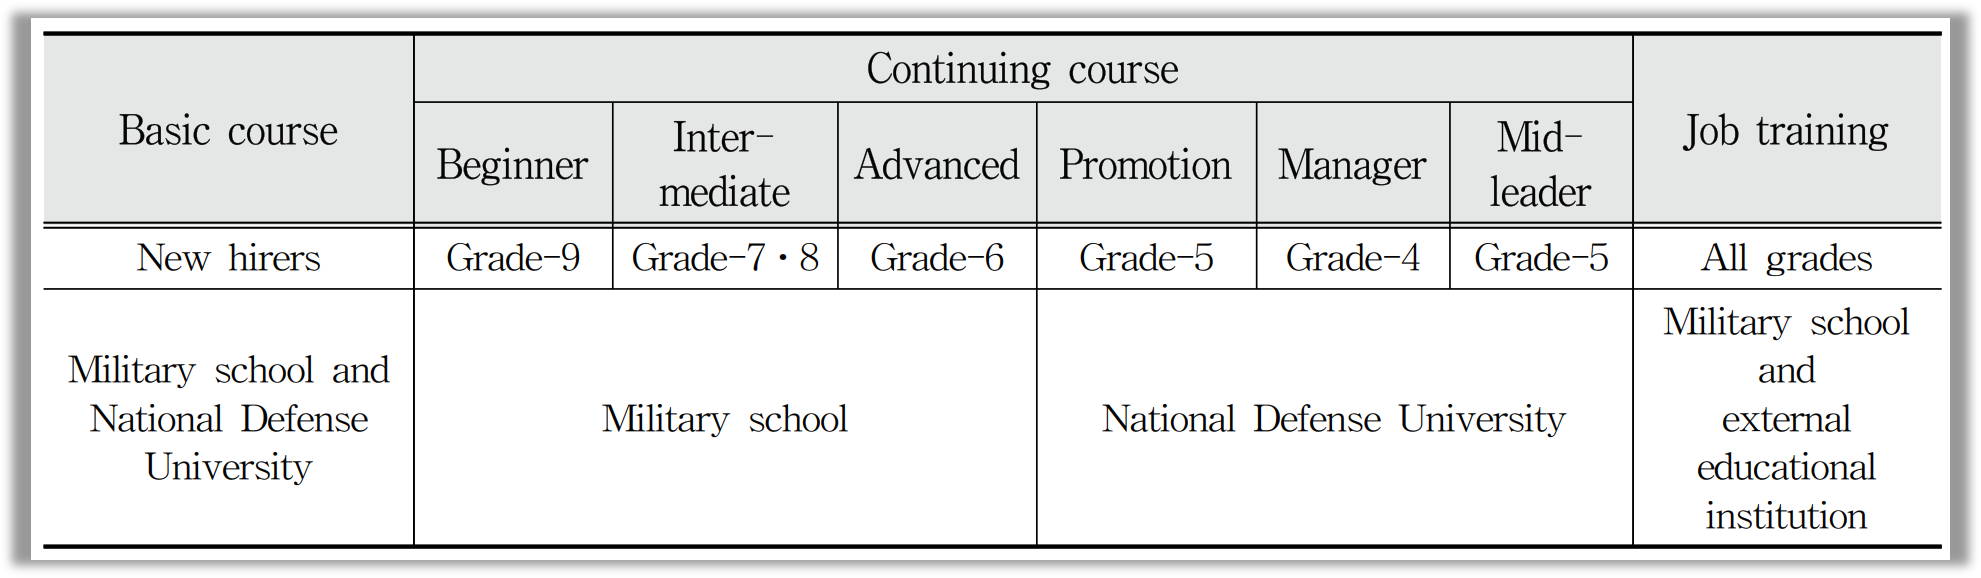 Curriculum system for the military personnel